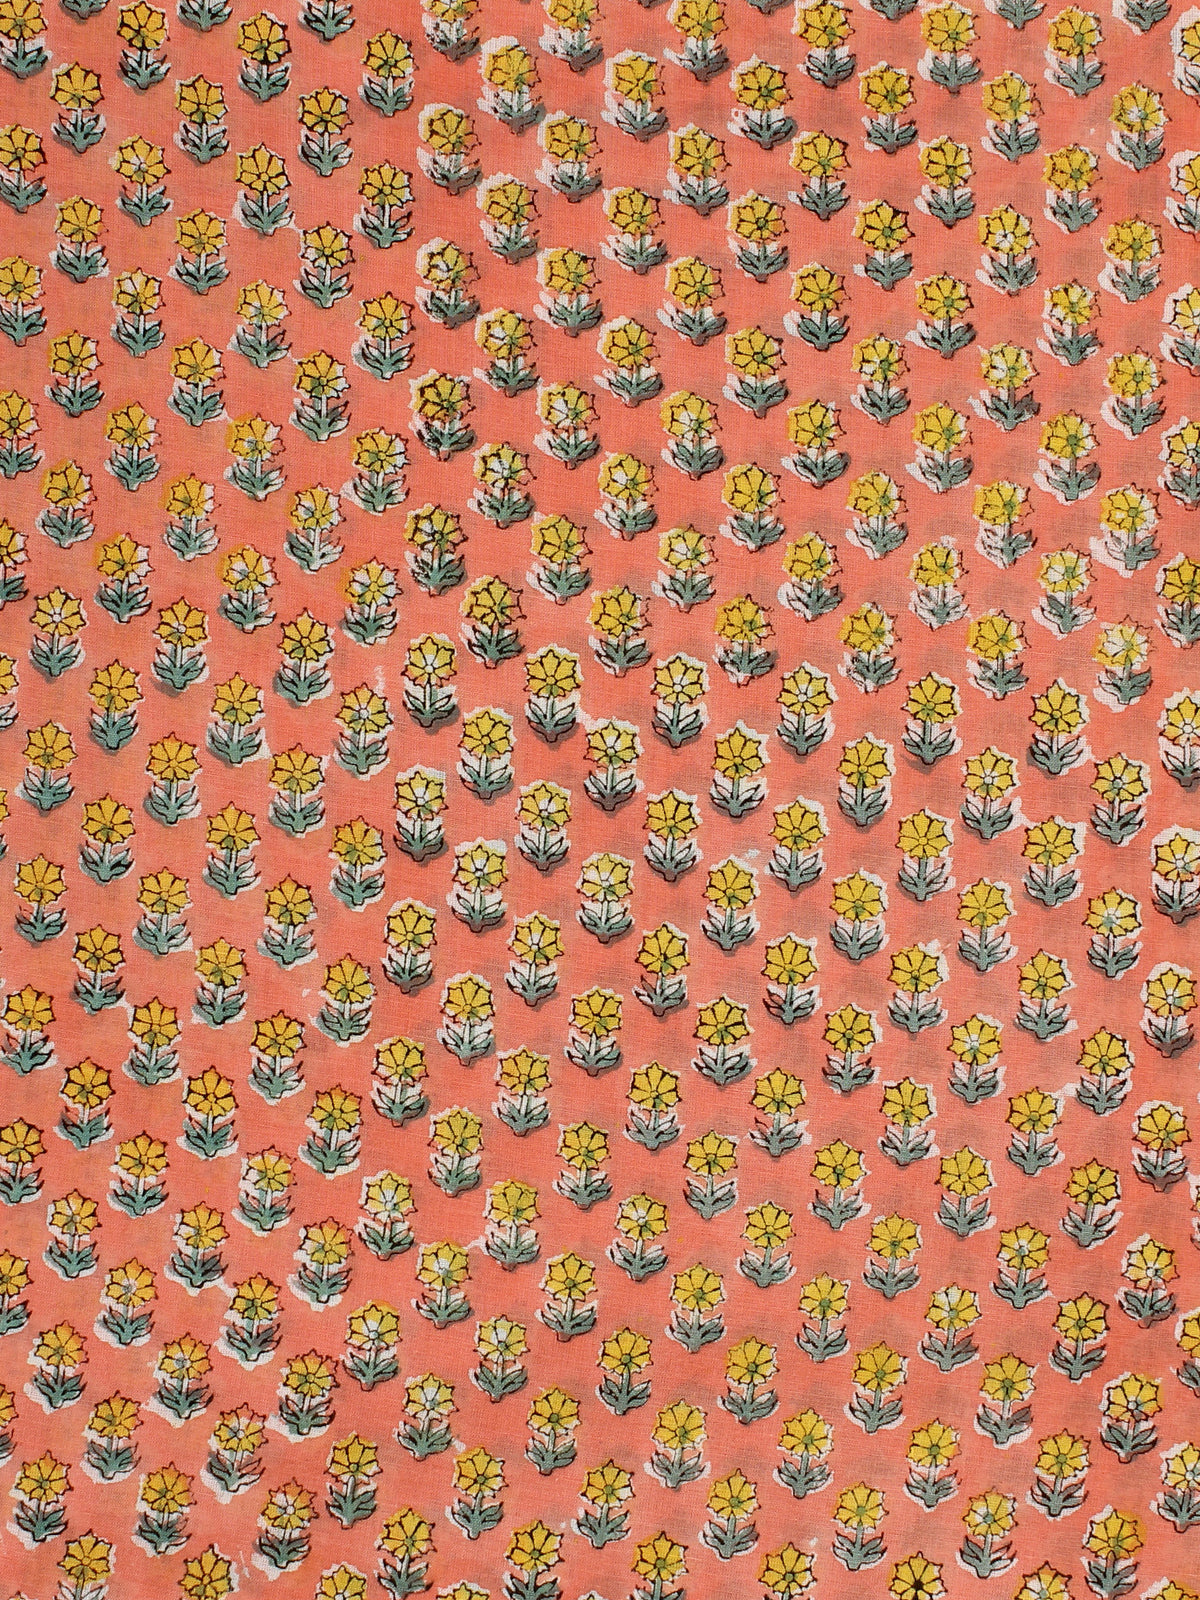 Coral Yellow Green Hand Block Printed Cotton Fabric Per Meter - F001F2312